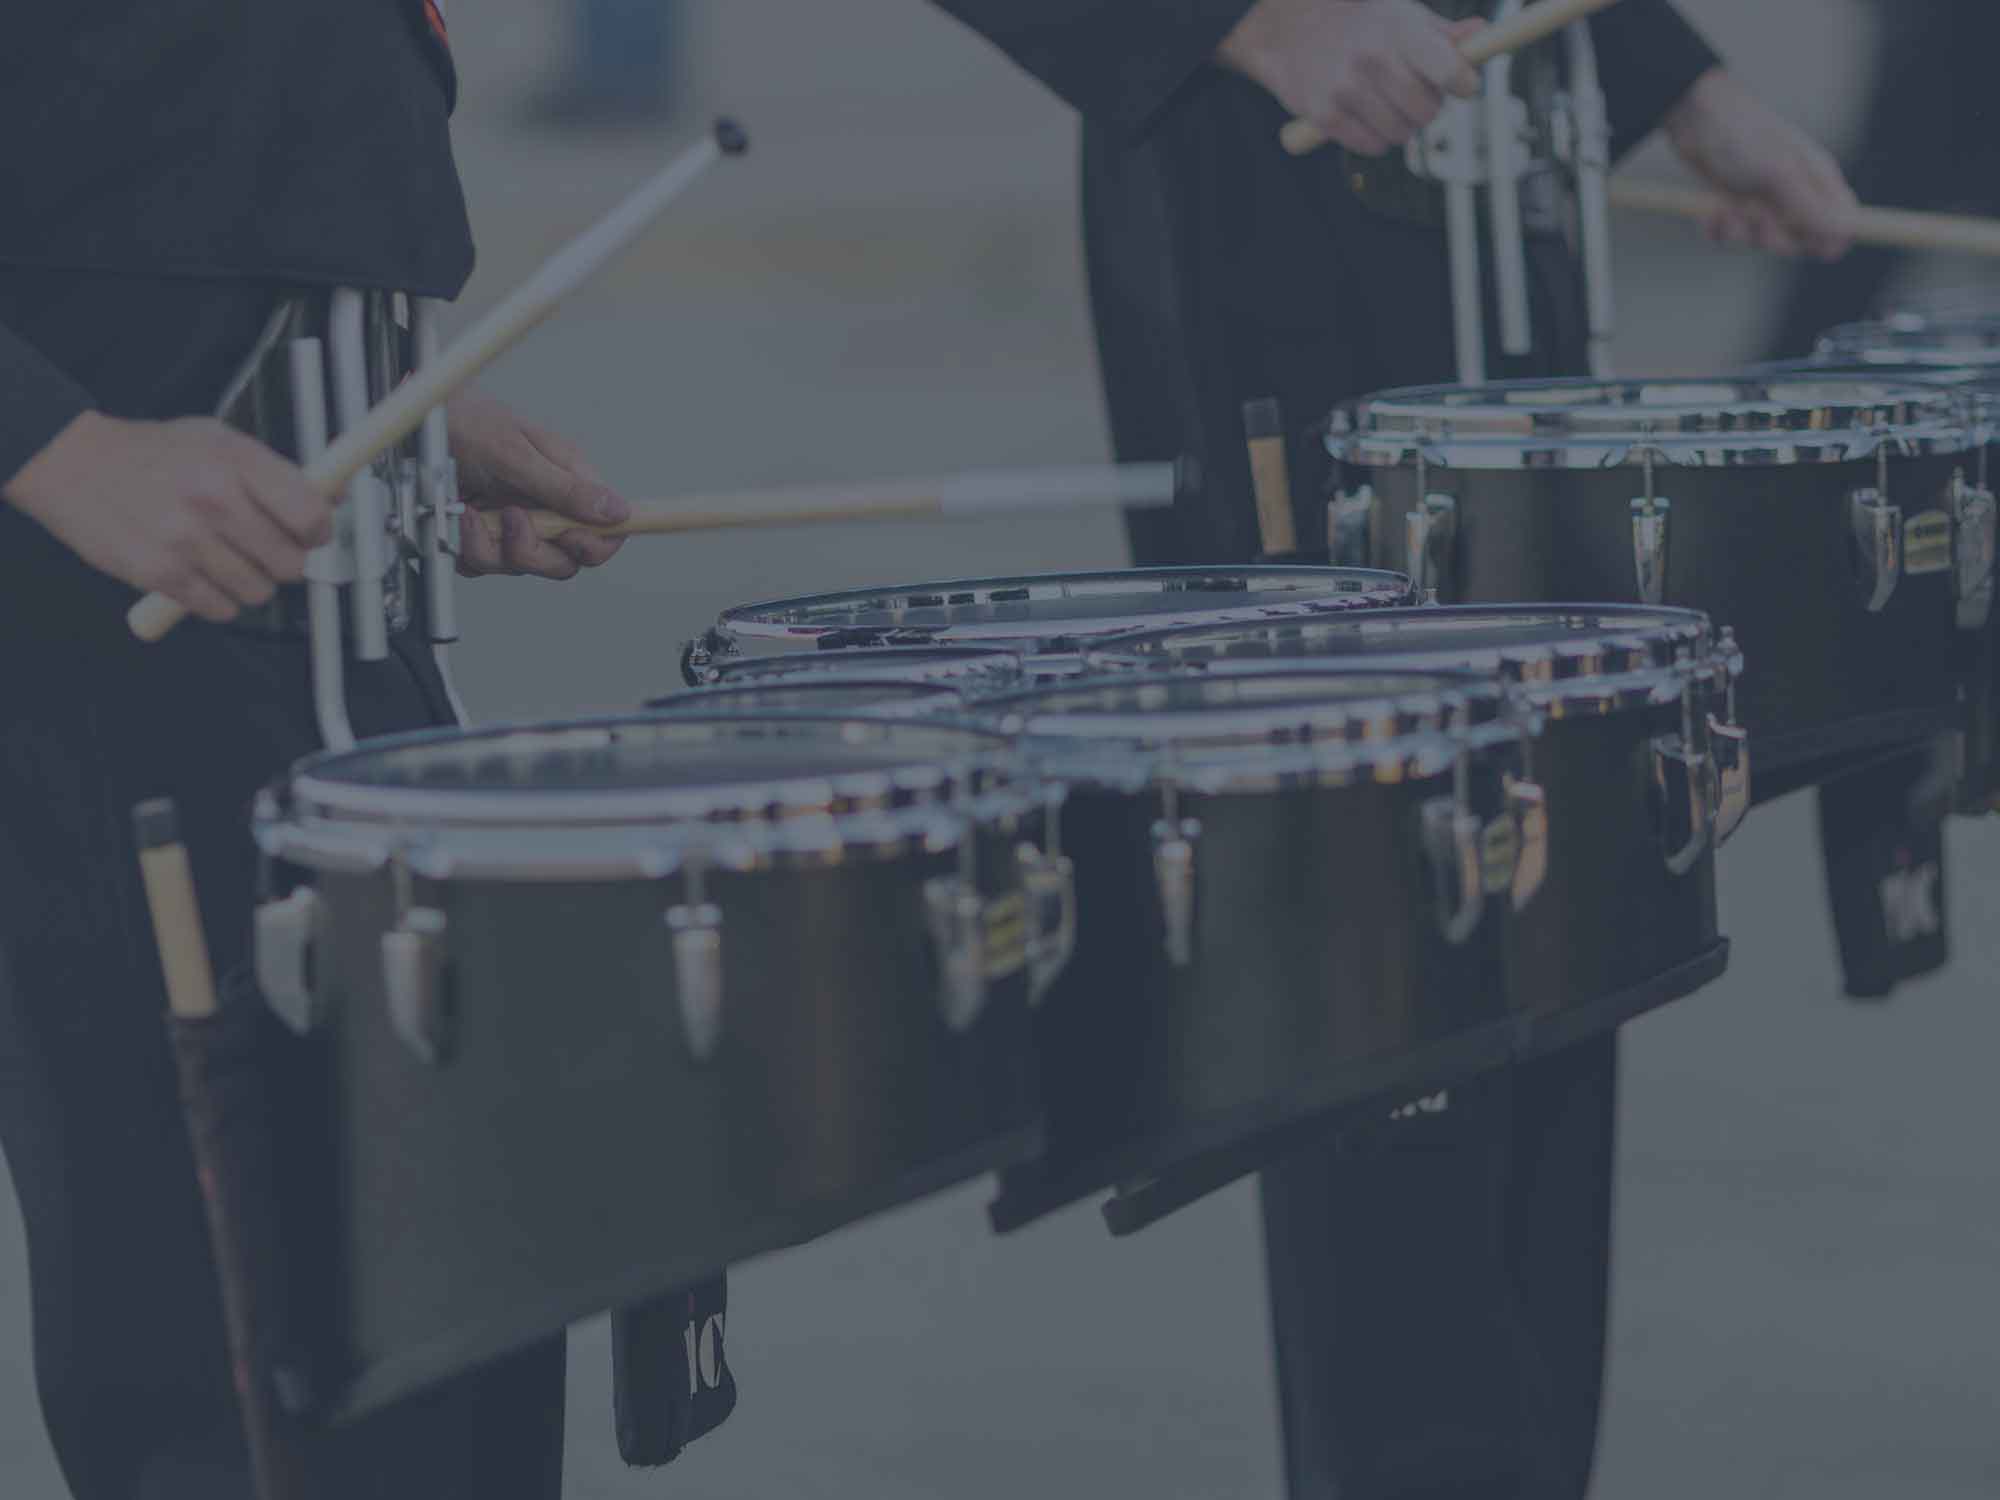 How a Major Drum Corps Attacked a Financial Problem